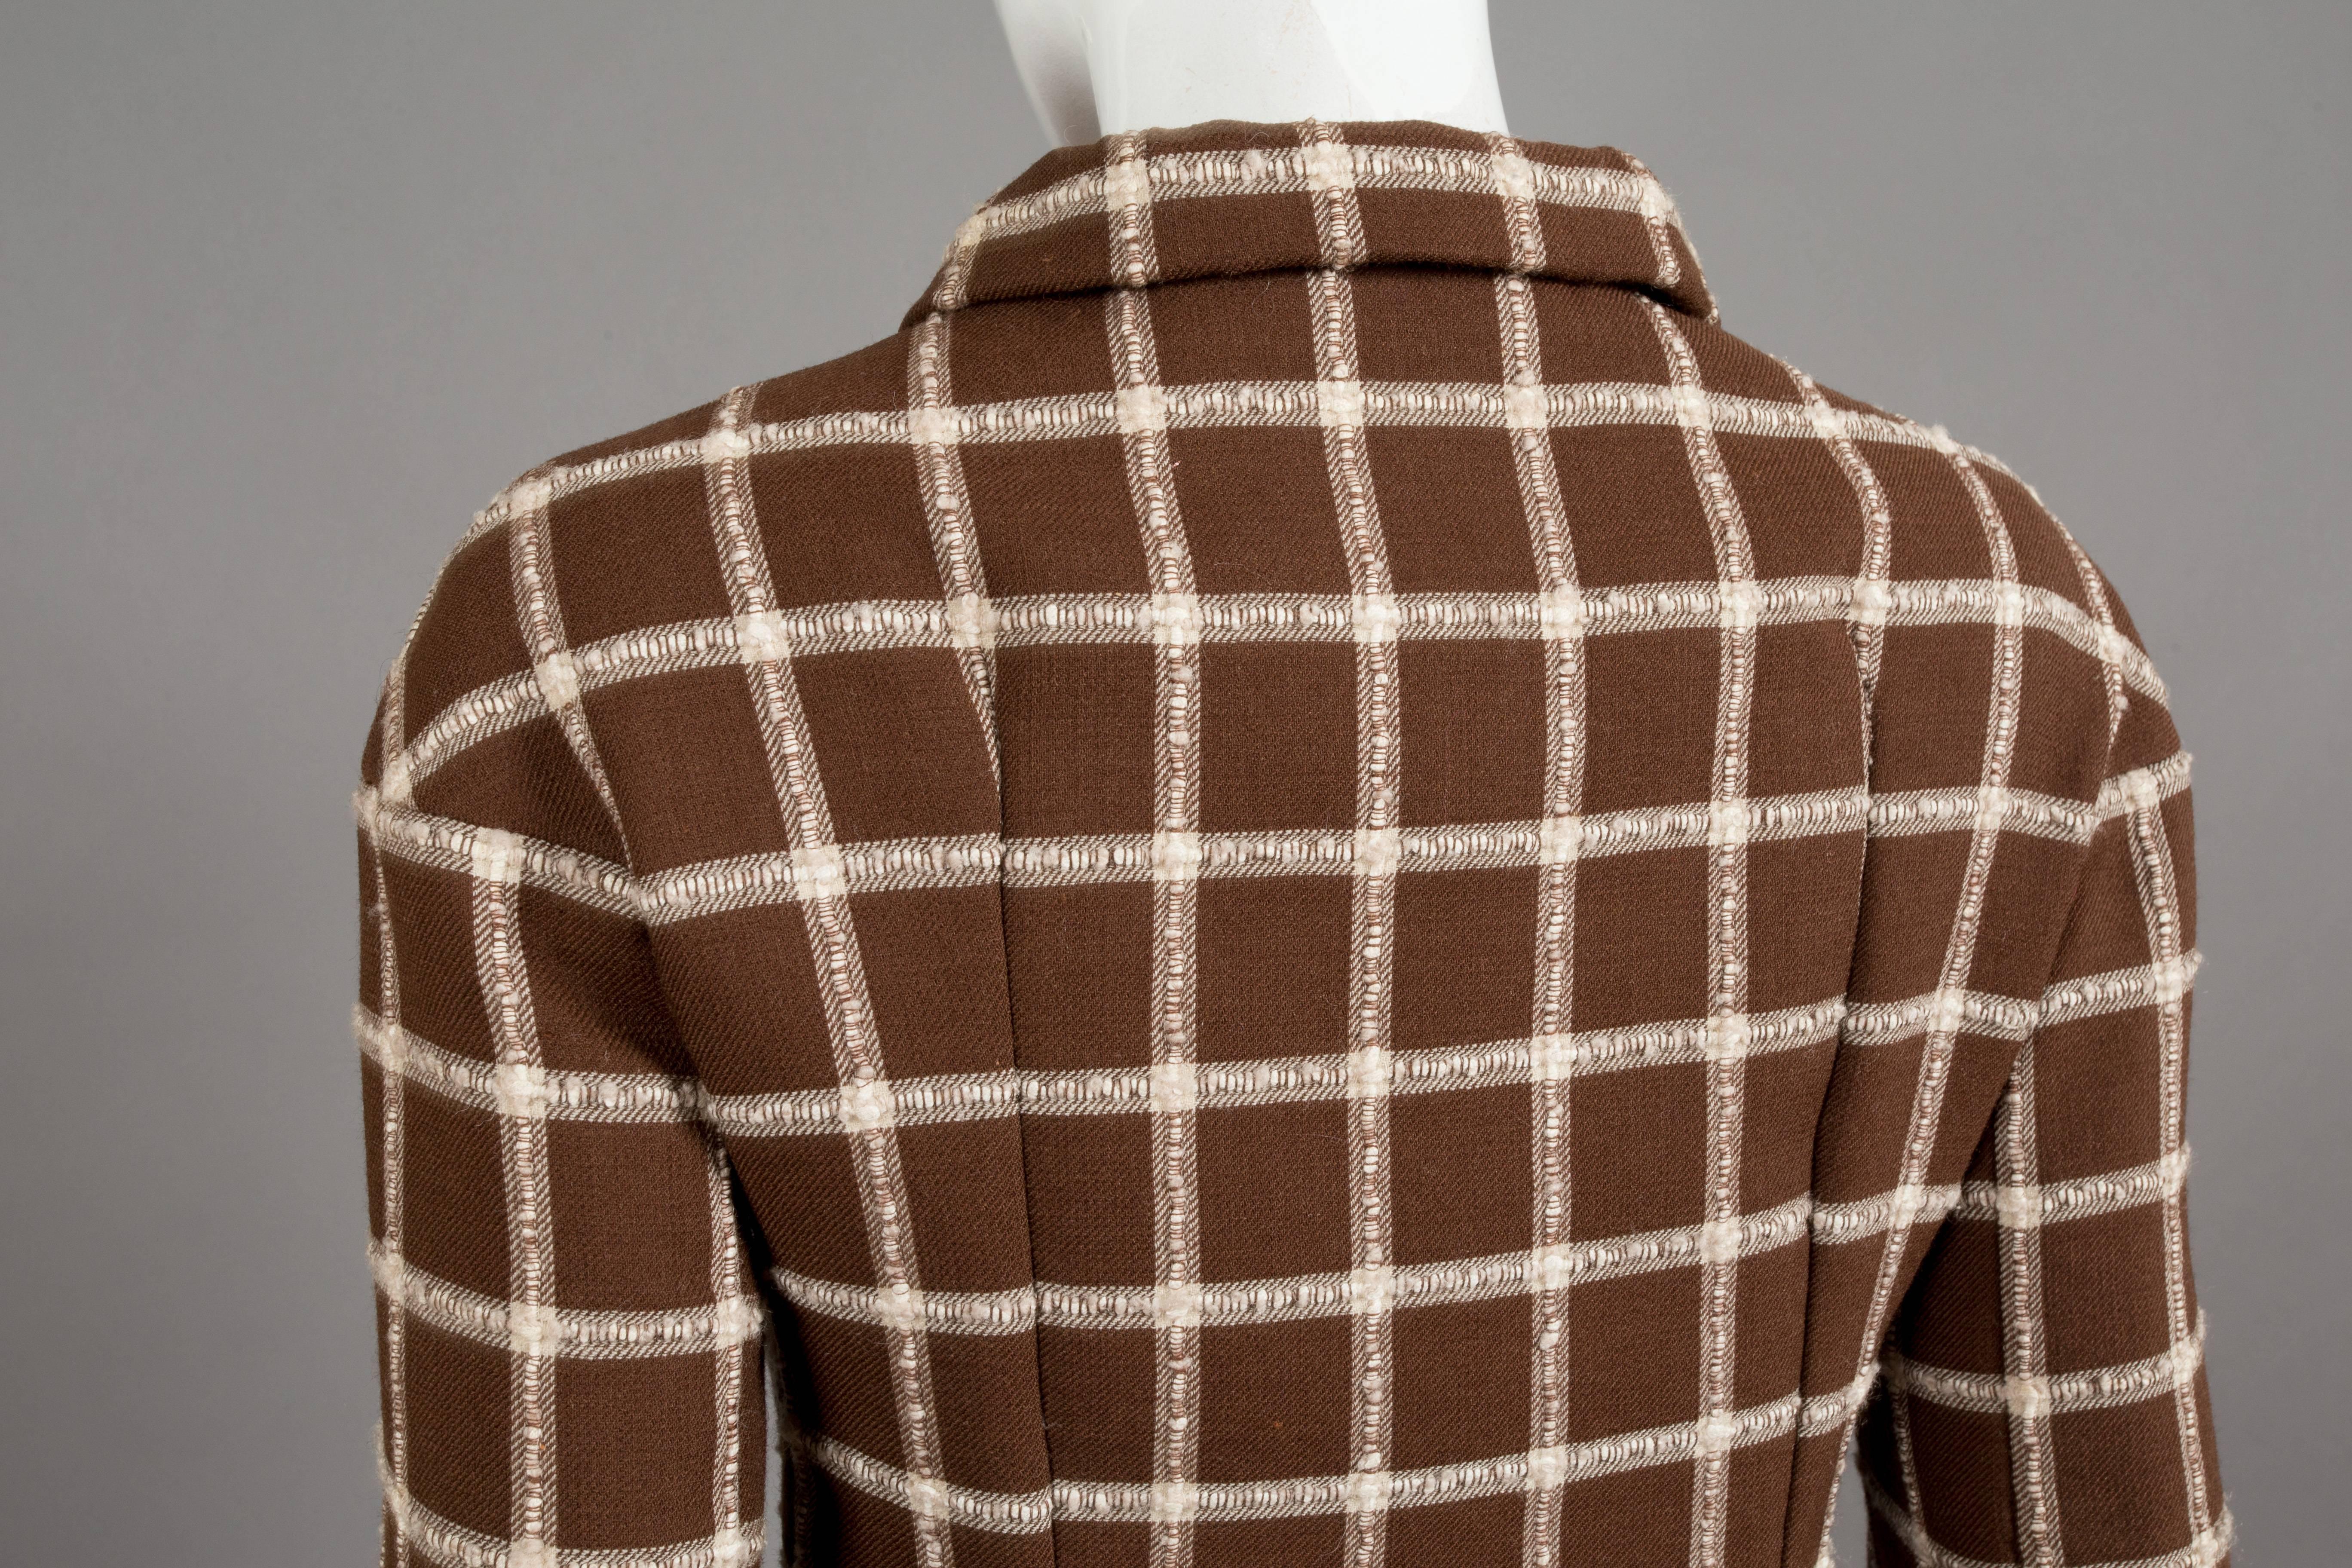 Women's Balenciaga Eisa couture flecked brown and cream checked tweed suit, C. 1965